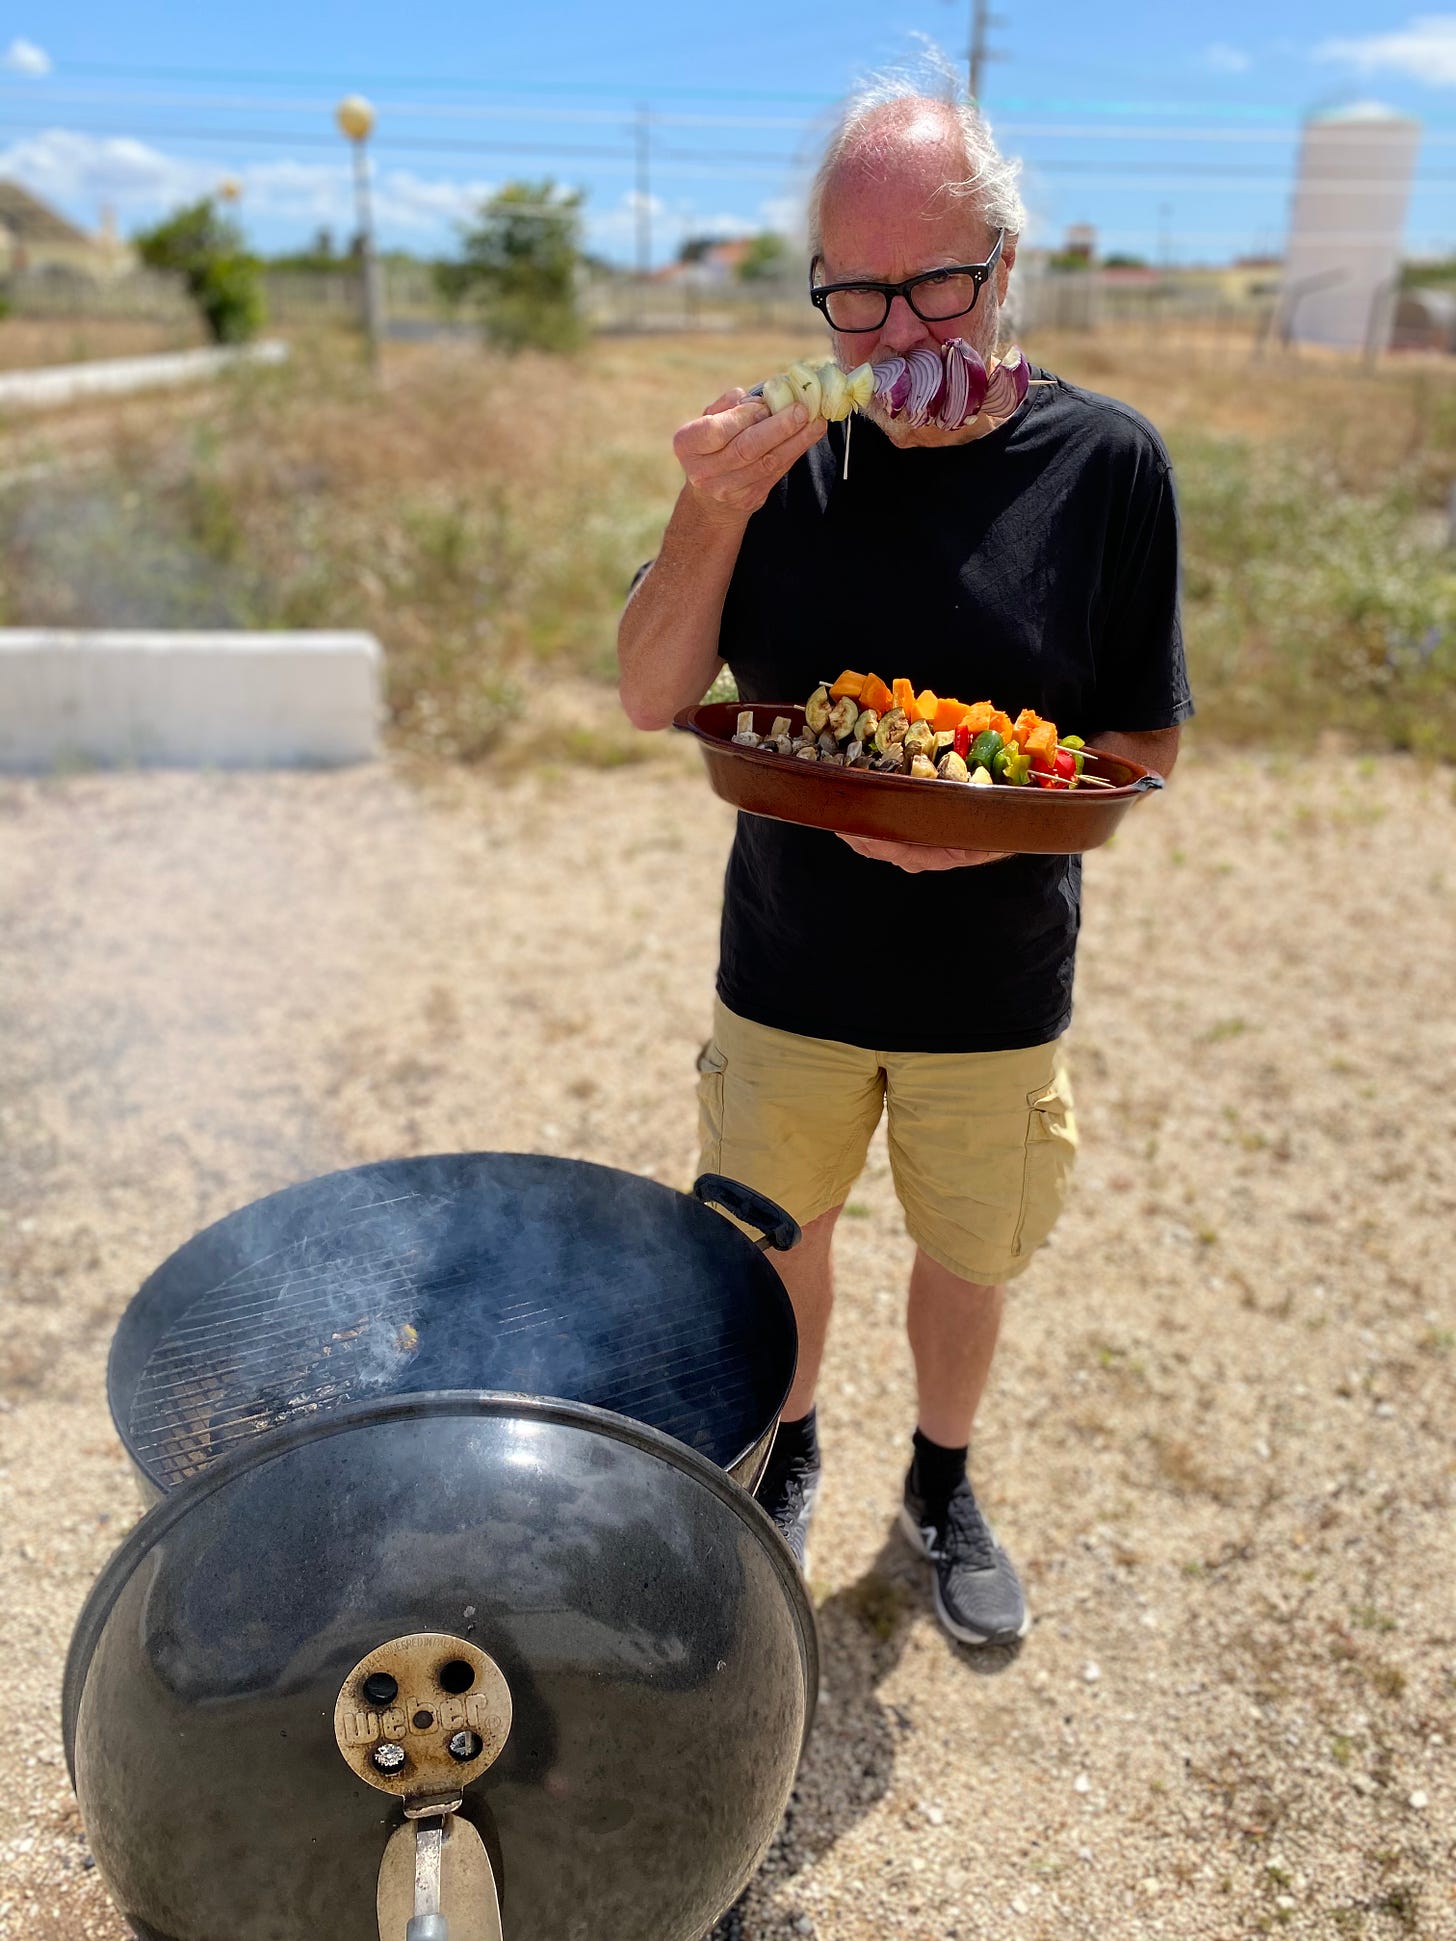 Simon Campbell fooling around with a vegetable kebab outside the Supertone Studio with a kettle BBQ